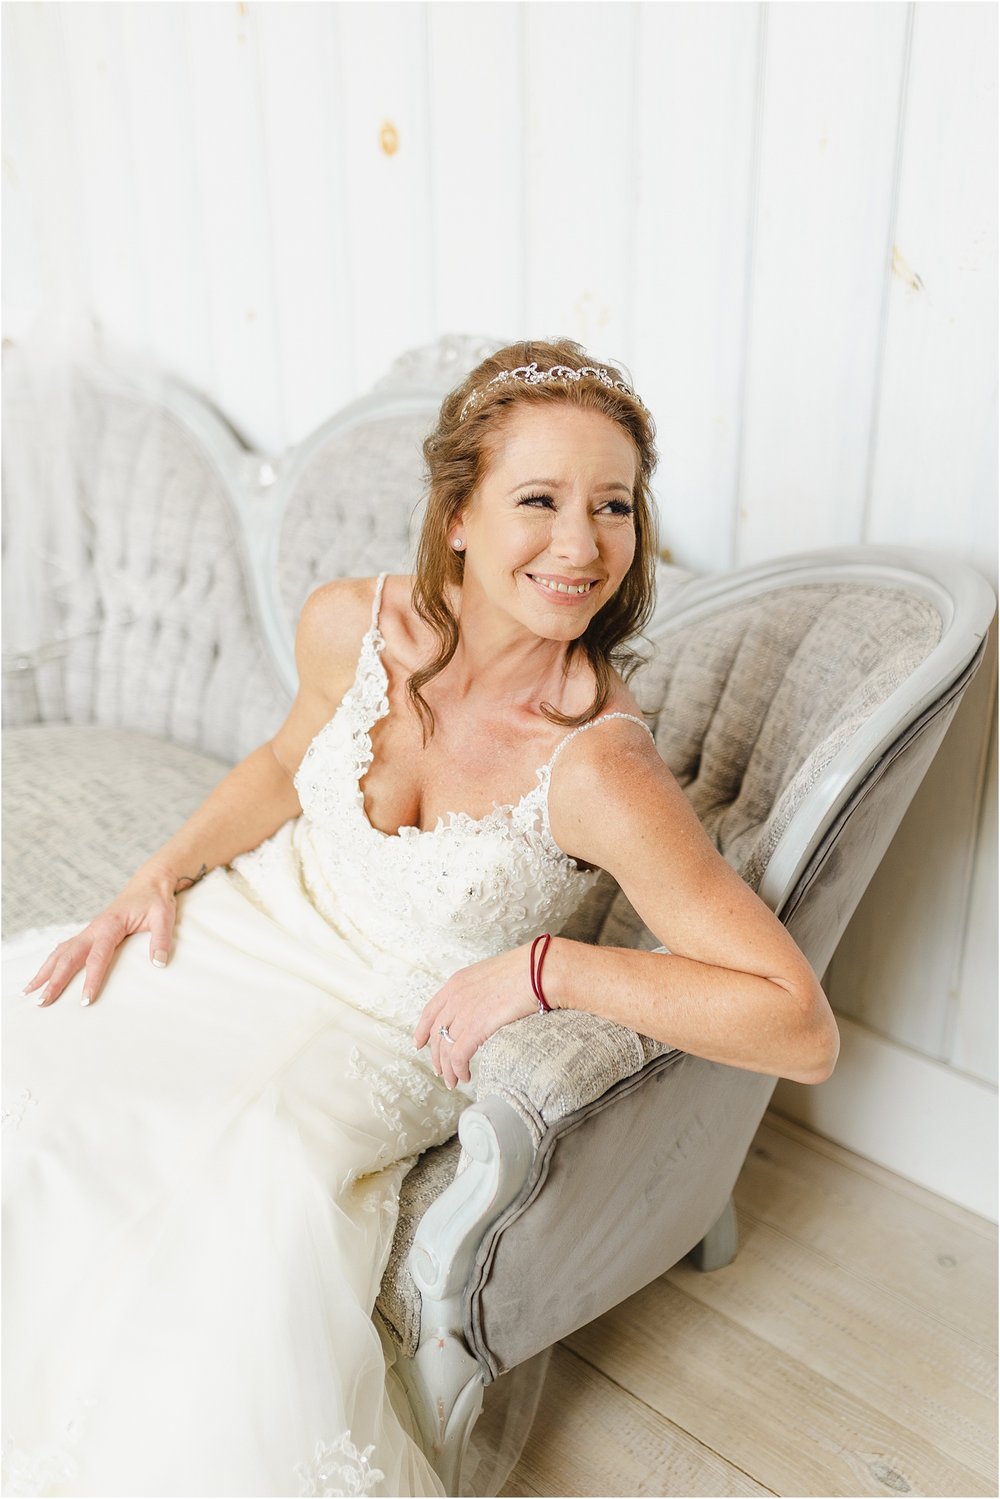 Bride Posing on Couch